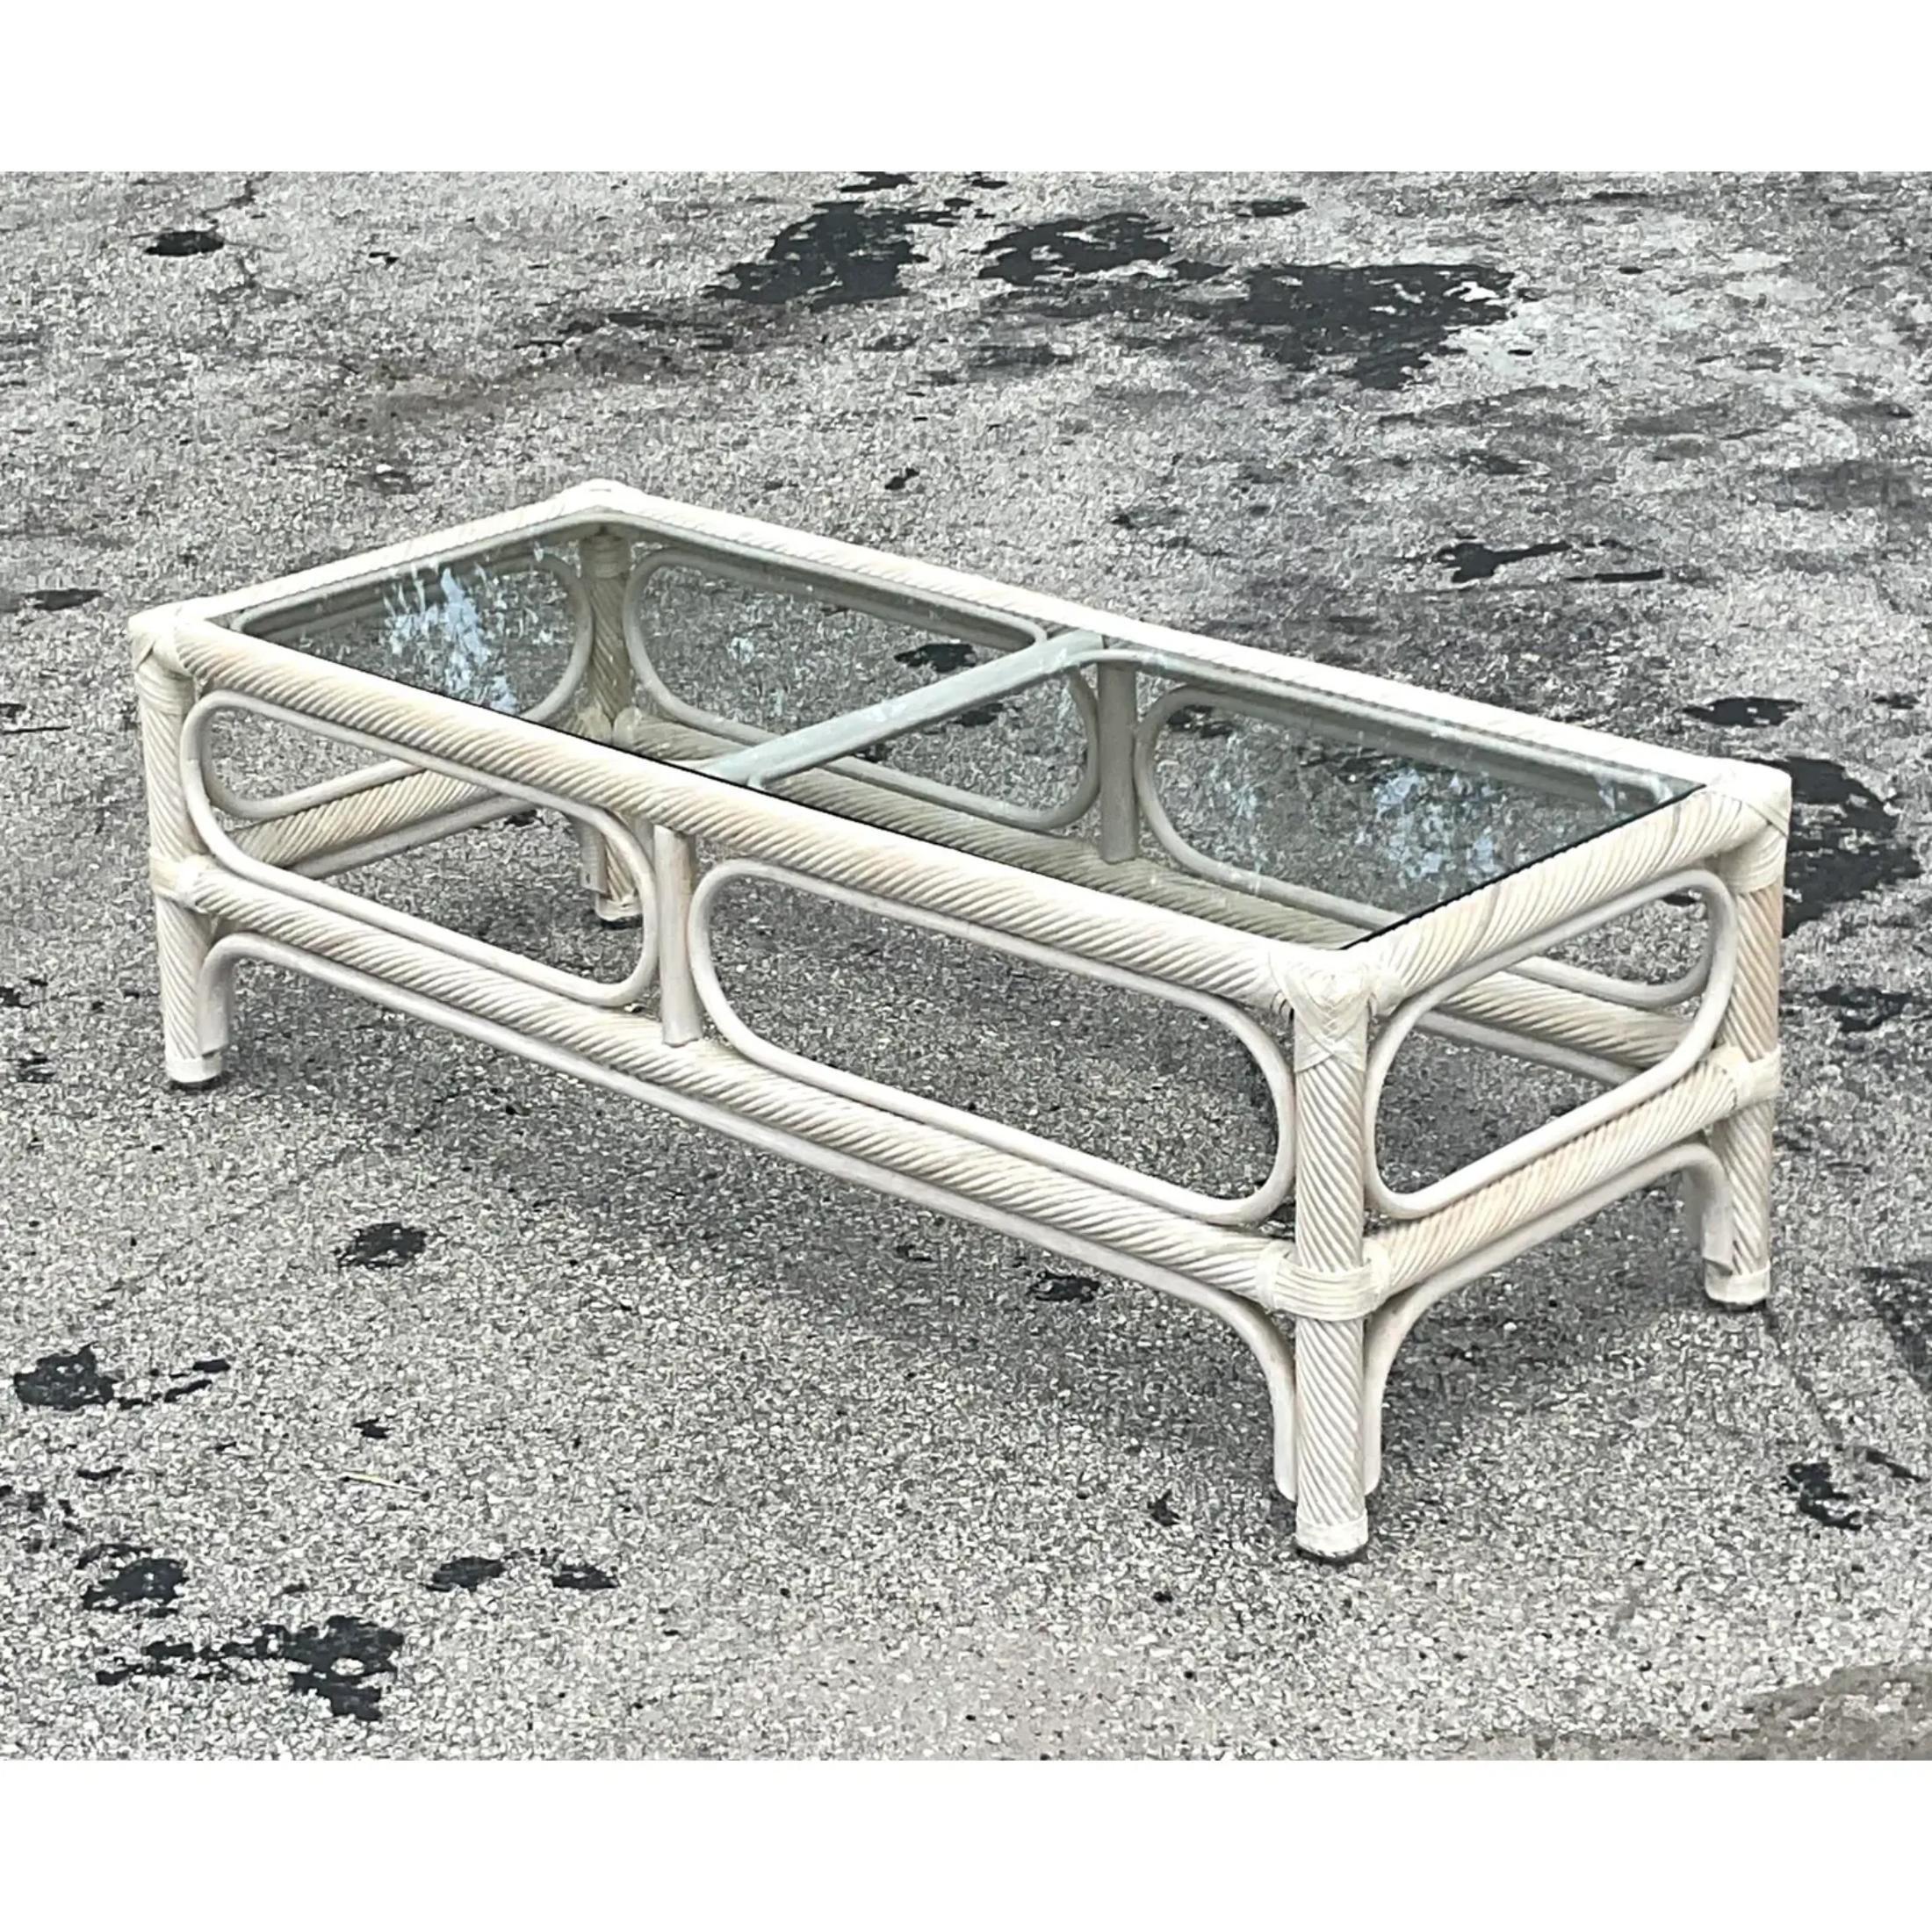 A fabulous vintage coastal coffee table. Chic twisted pencil reed design in a cerused finish inset smoked glass panel. Matching side tables also available on my Chairish page. Acquired from a Palm Beach estate